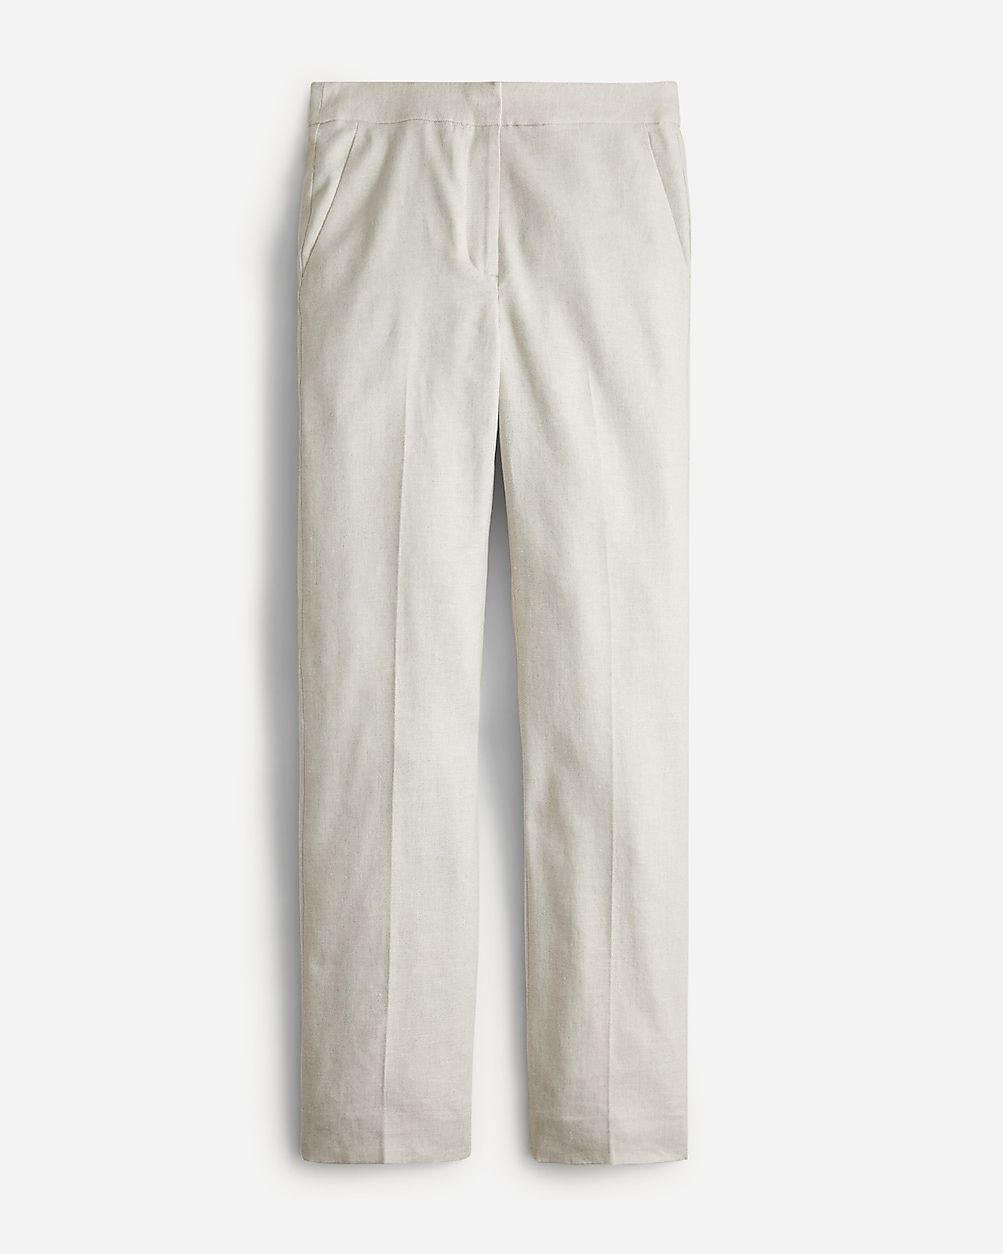 Tall Kate straight-leg pant in stretch linen blend | J.Crew US